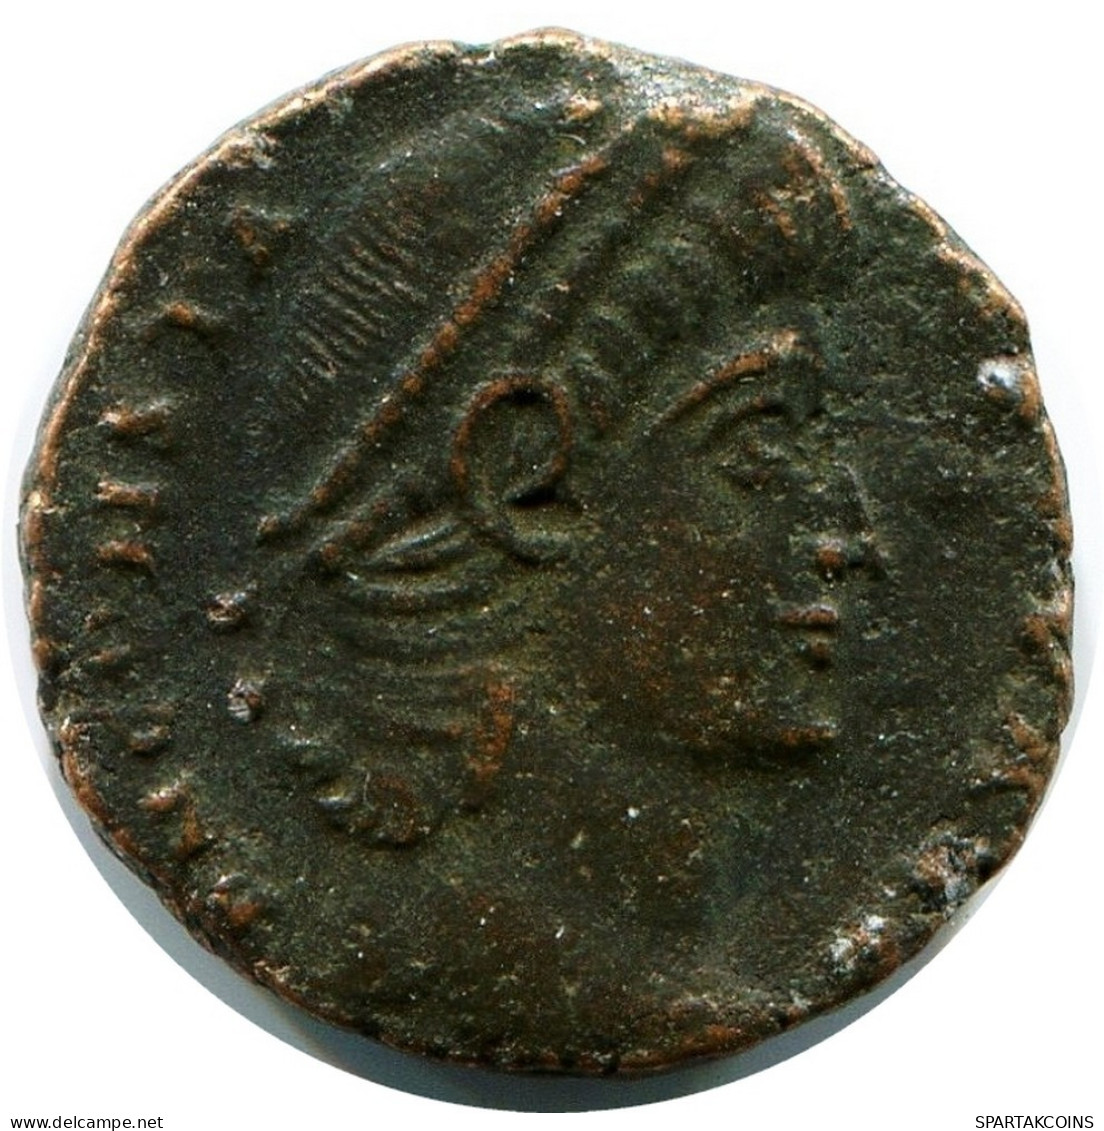 CONSTANS MINTED IN ANTIOCH FOUND IN IHNASYAH HOARD EGYPT #ANC11824.14.D.A - El Impero Christiano (307 / 363)